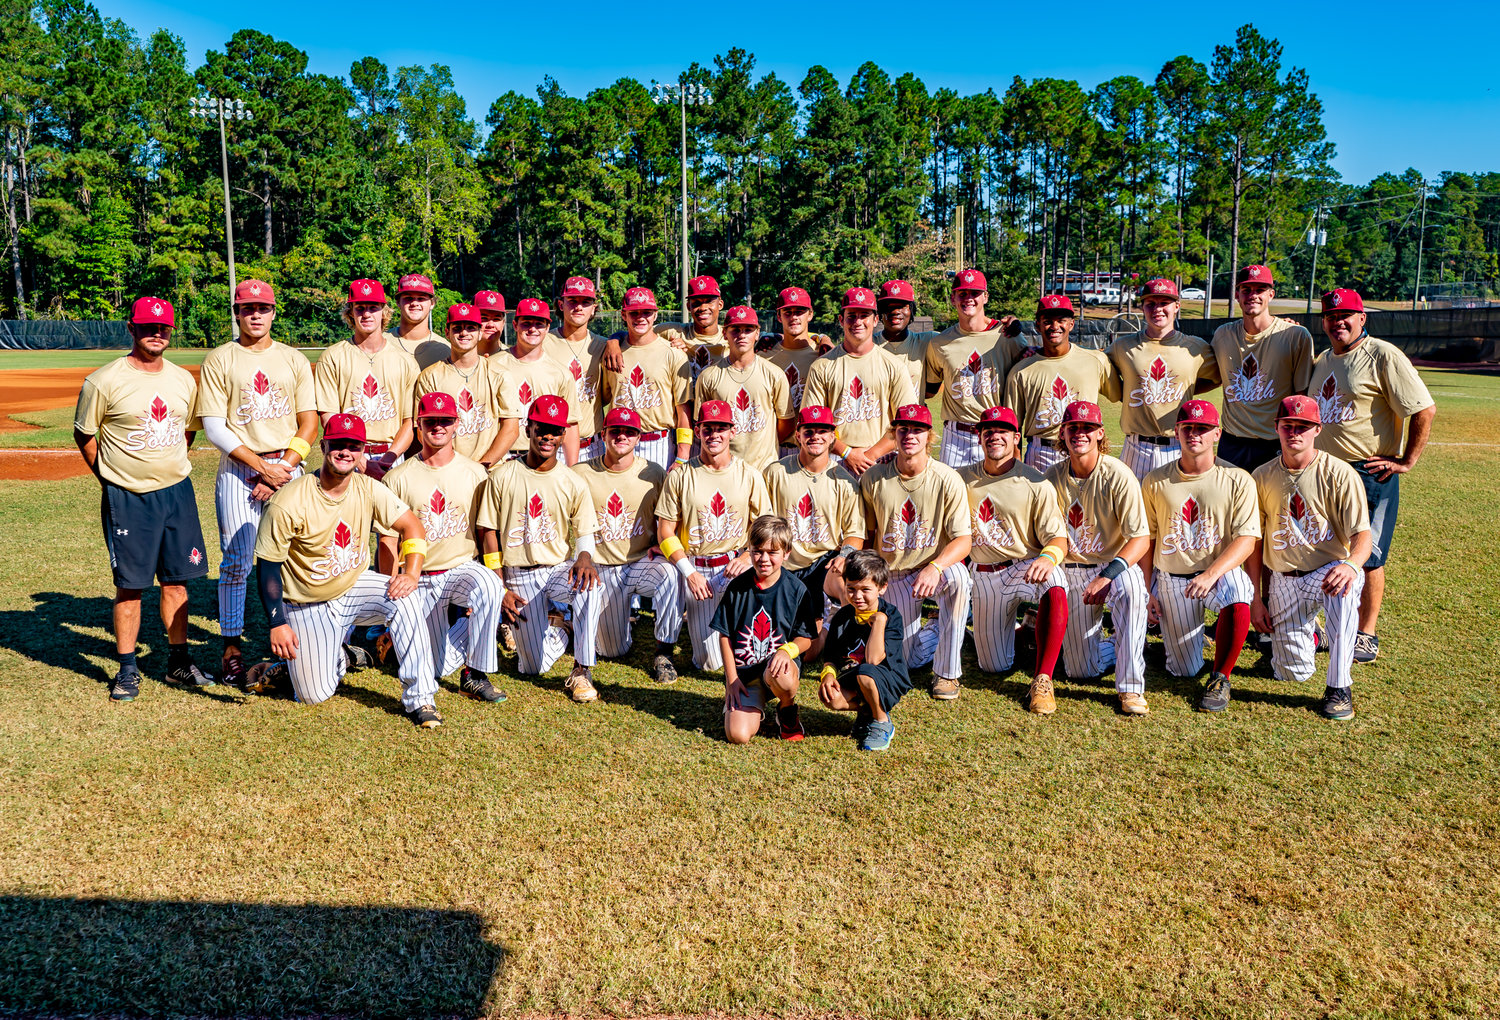 The Coastal Alabama Sun Chiefs' bat boys Oct. 7 were Cullen and Eli McKinney as part of the "Go Gold" Fall Tournament in Bay Minette. All the proceeds went directly to the Baldwin County-based Berry Strong Foundation, which provides support for Childhood Cancer research.